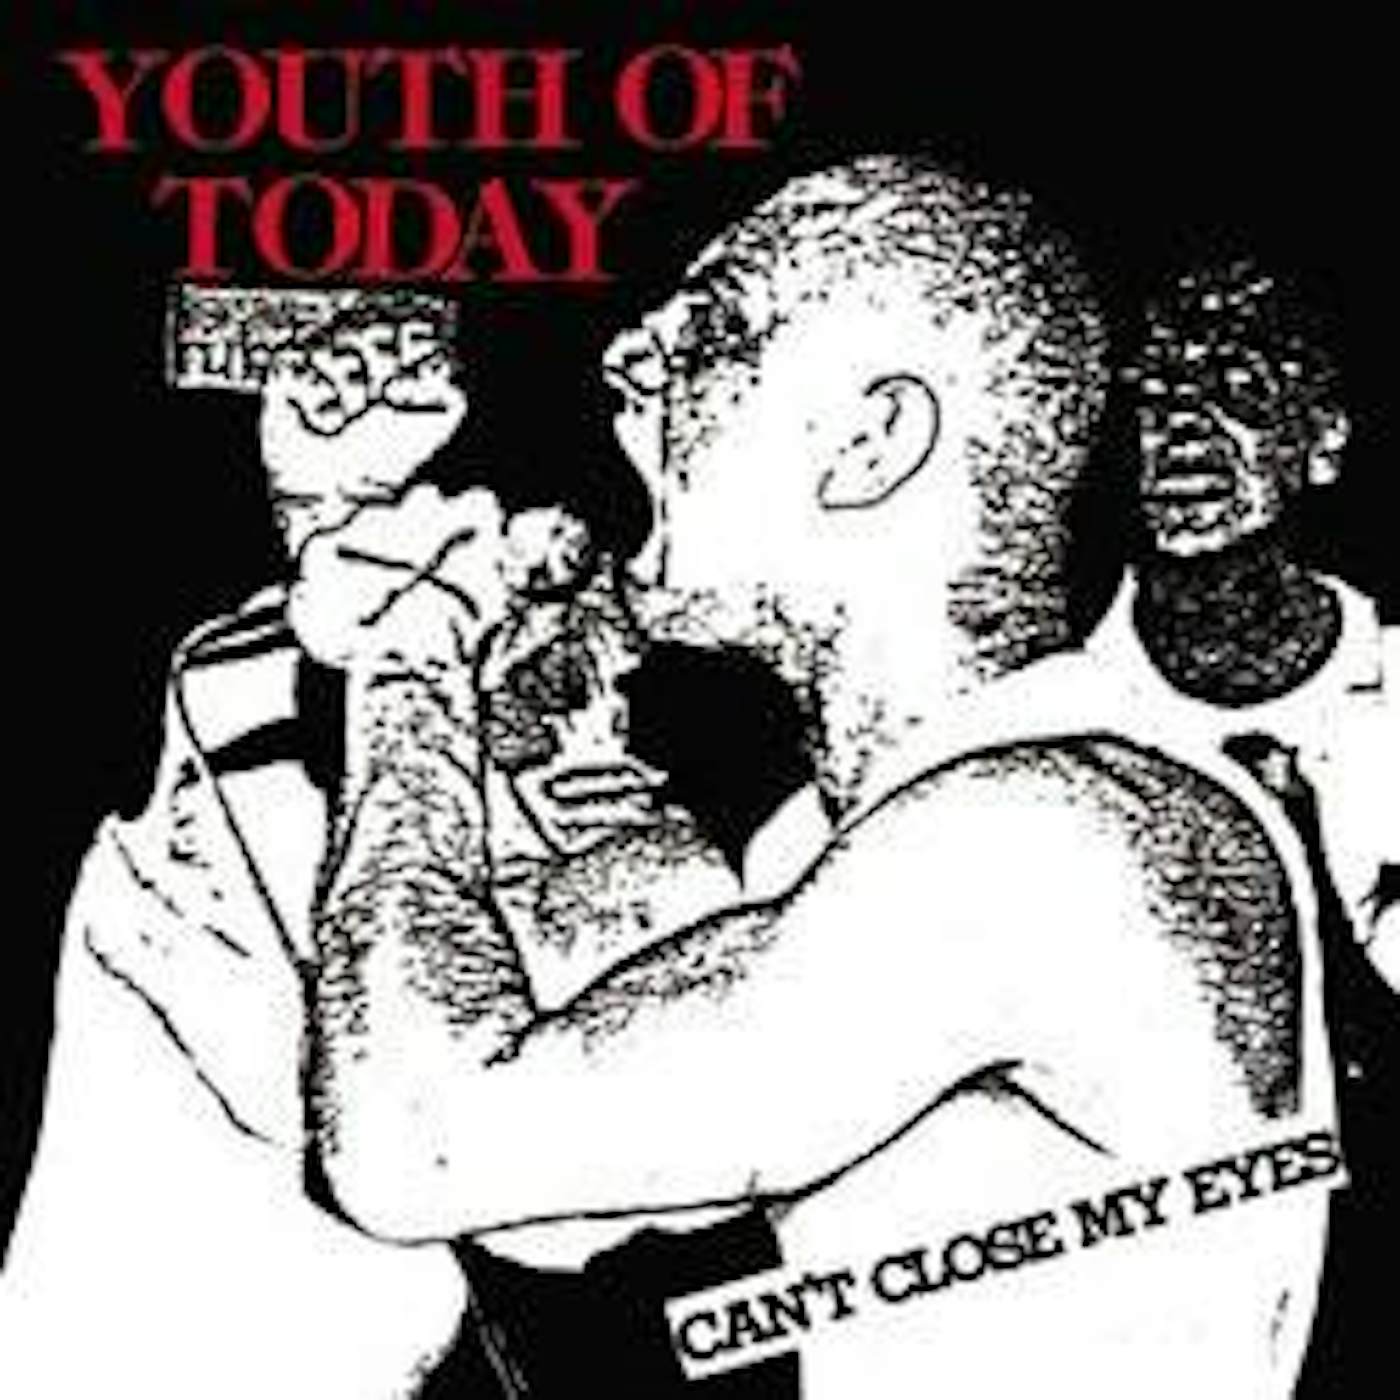 Youth Of Today CAN’T CLOSE MY EYES Vinyl Record